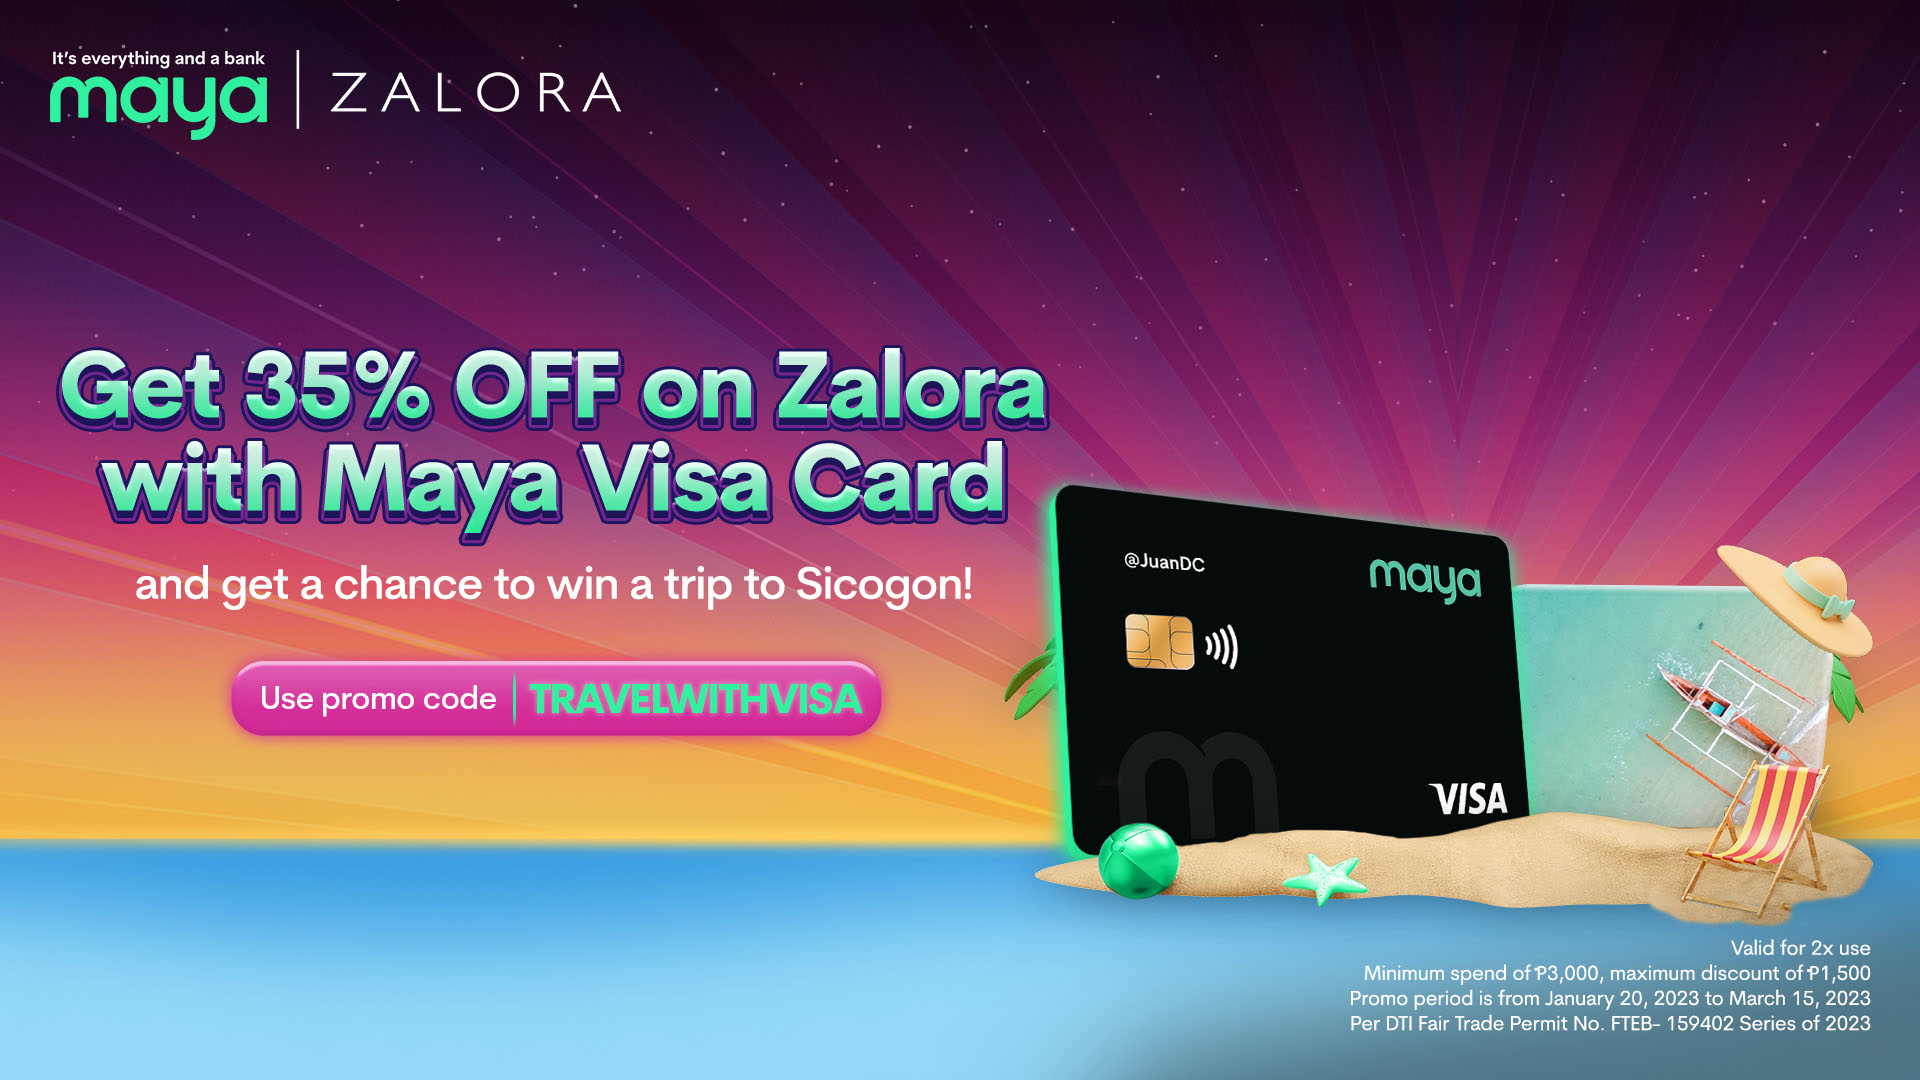 Get 35% OFF on Zalora and a chance to win a Sicogon Trip with Visa!